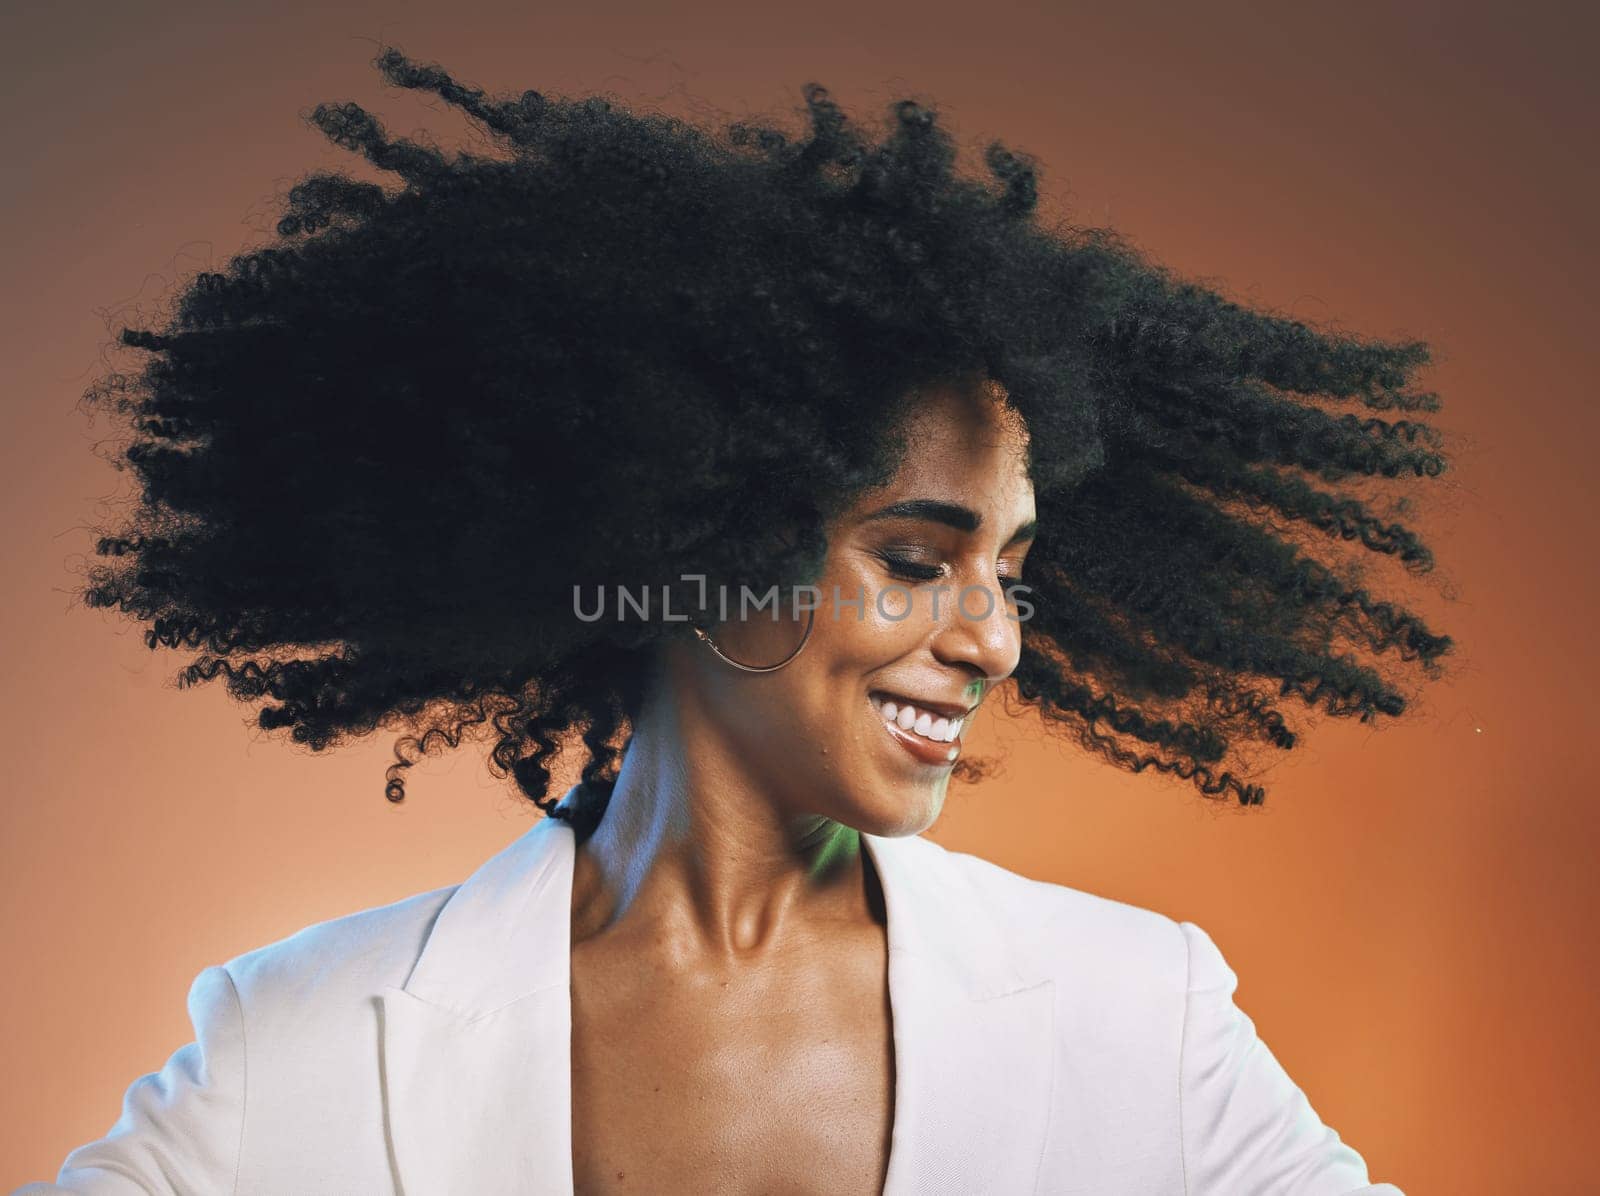 Natural hair, beauty and black woman with hair care, cosmetics and happiness against studio background. Makeup, dance and freedom with pride in curly hair texture and wellness in skincare headshot.